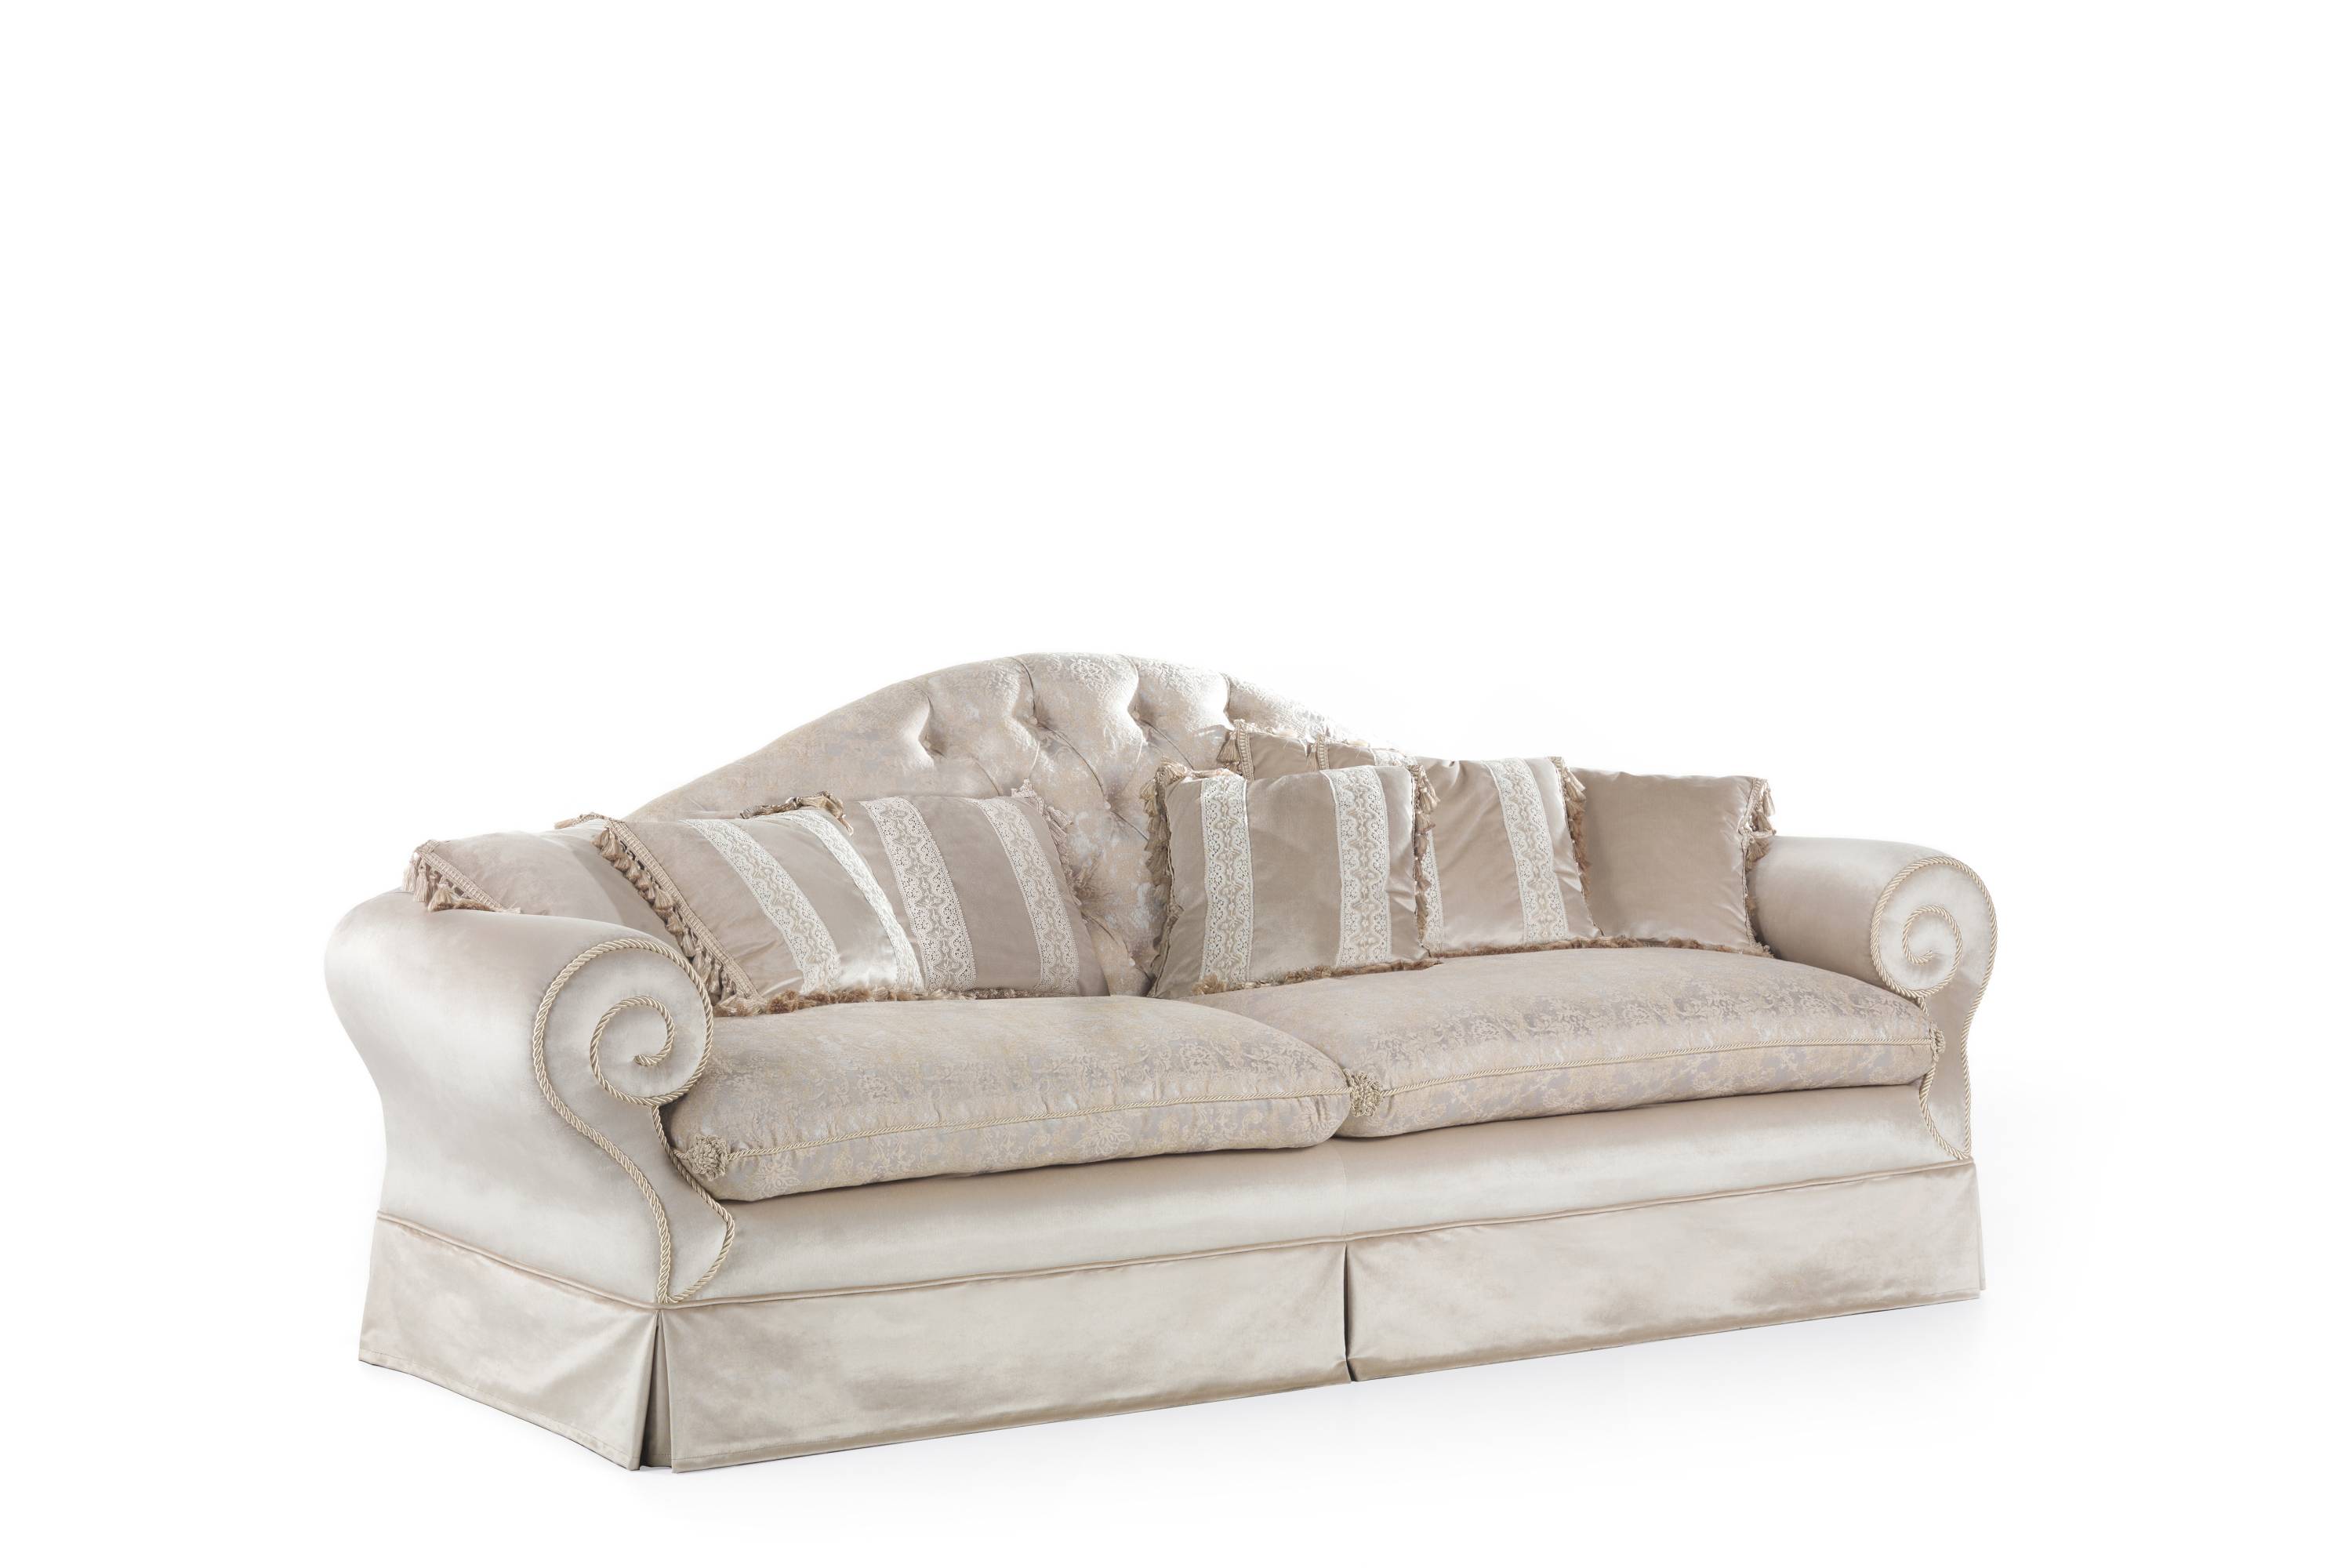 SCARLETT 2-seater sofa - 3-seater sofa - Bespoke projects with luxury Made in Italy classic furniture